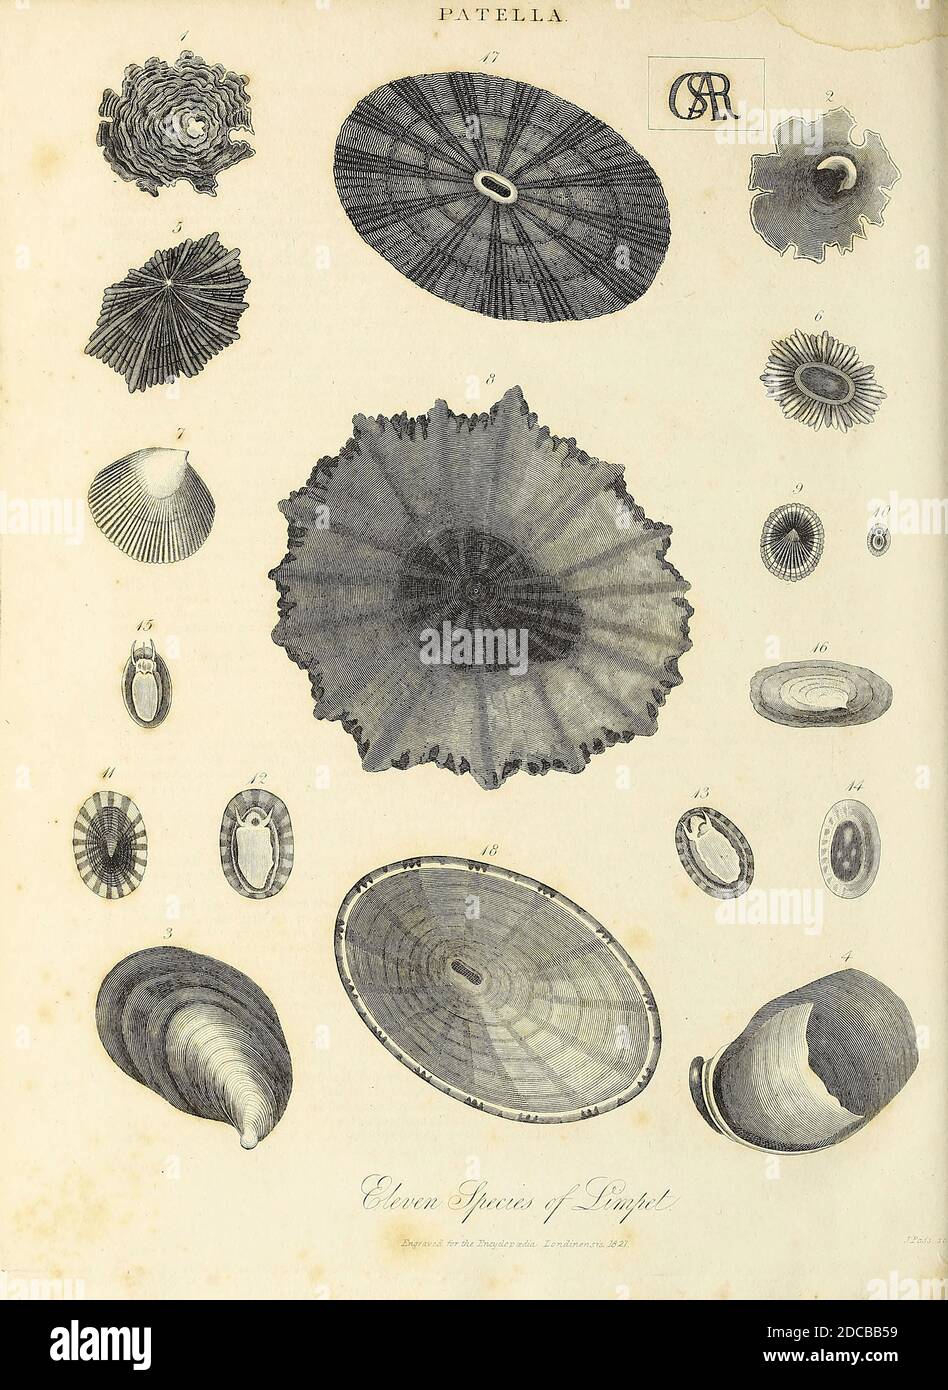 Patella is a genus of sea snails with gills, typical true limpets, marine gastropod mollusks in the family Patellidae, the true limpets Copperplate engraving From the Encyclopaedia Londinensis or, Universal dictionary of arts, sciences, and literature; Volume XVIII;  Edited by Wilkes, John. Published in London in 1821 Stock Photo